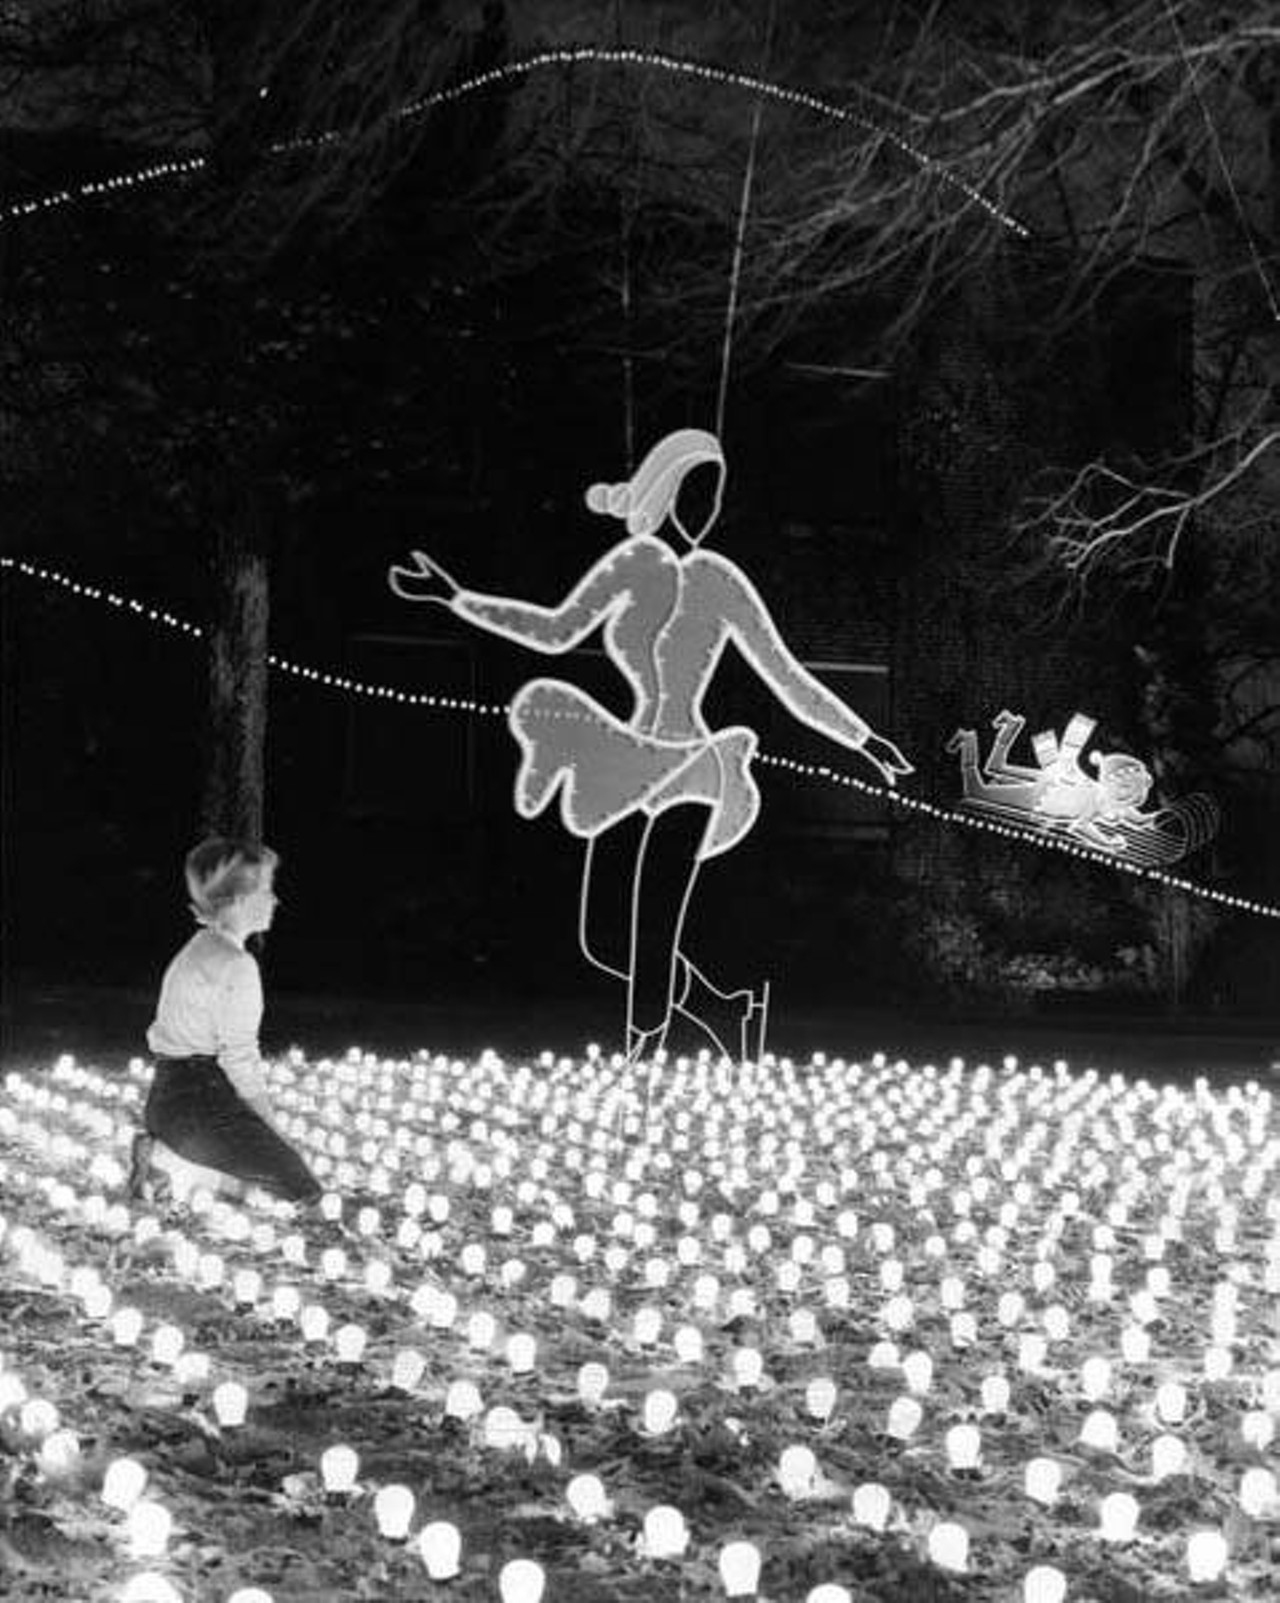 Christmas Display at Nela Park includes a figure skater gliding on frozen pond of lights while a bobsledder in the background takes a ride down a hill of lights, 1958.